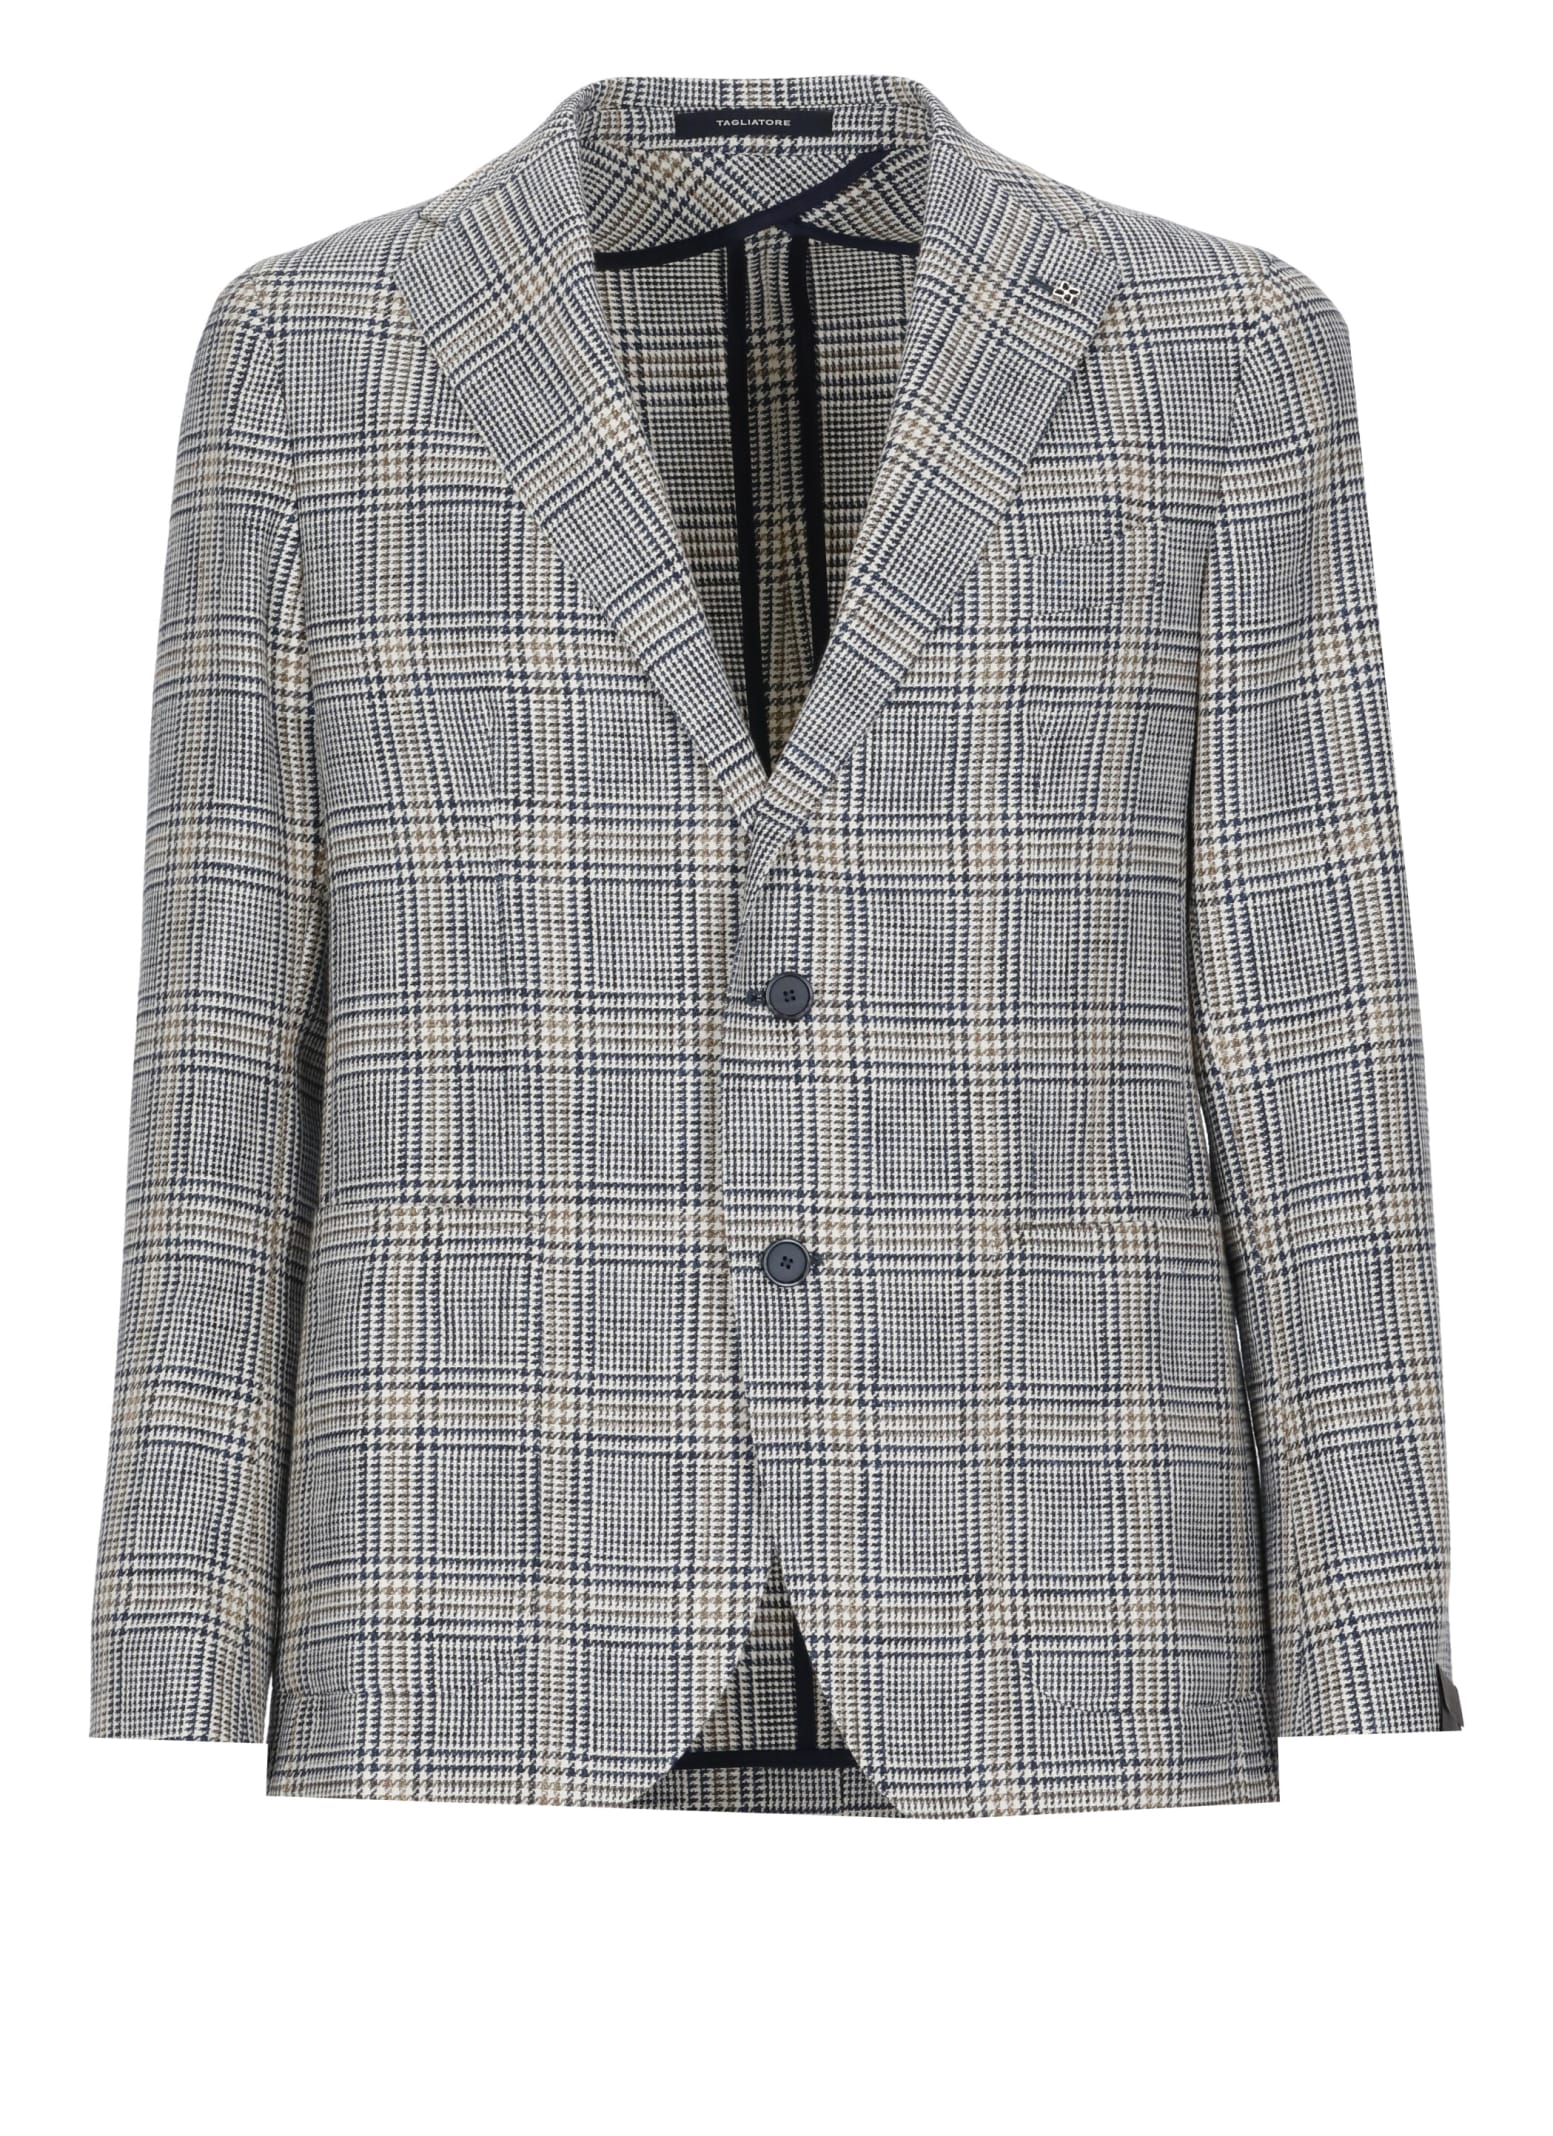 Tagliatore Cotton, Linen And Wool Jacket In Navy